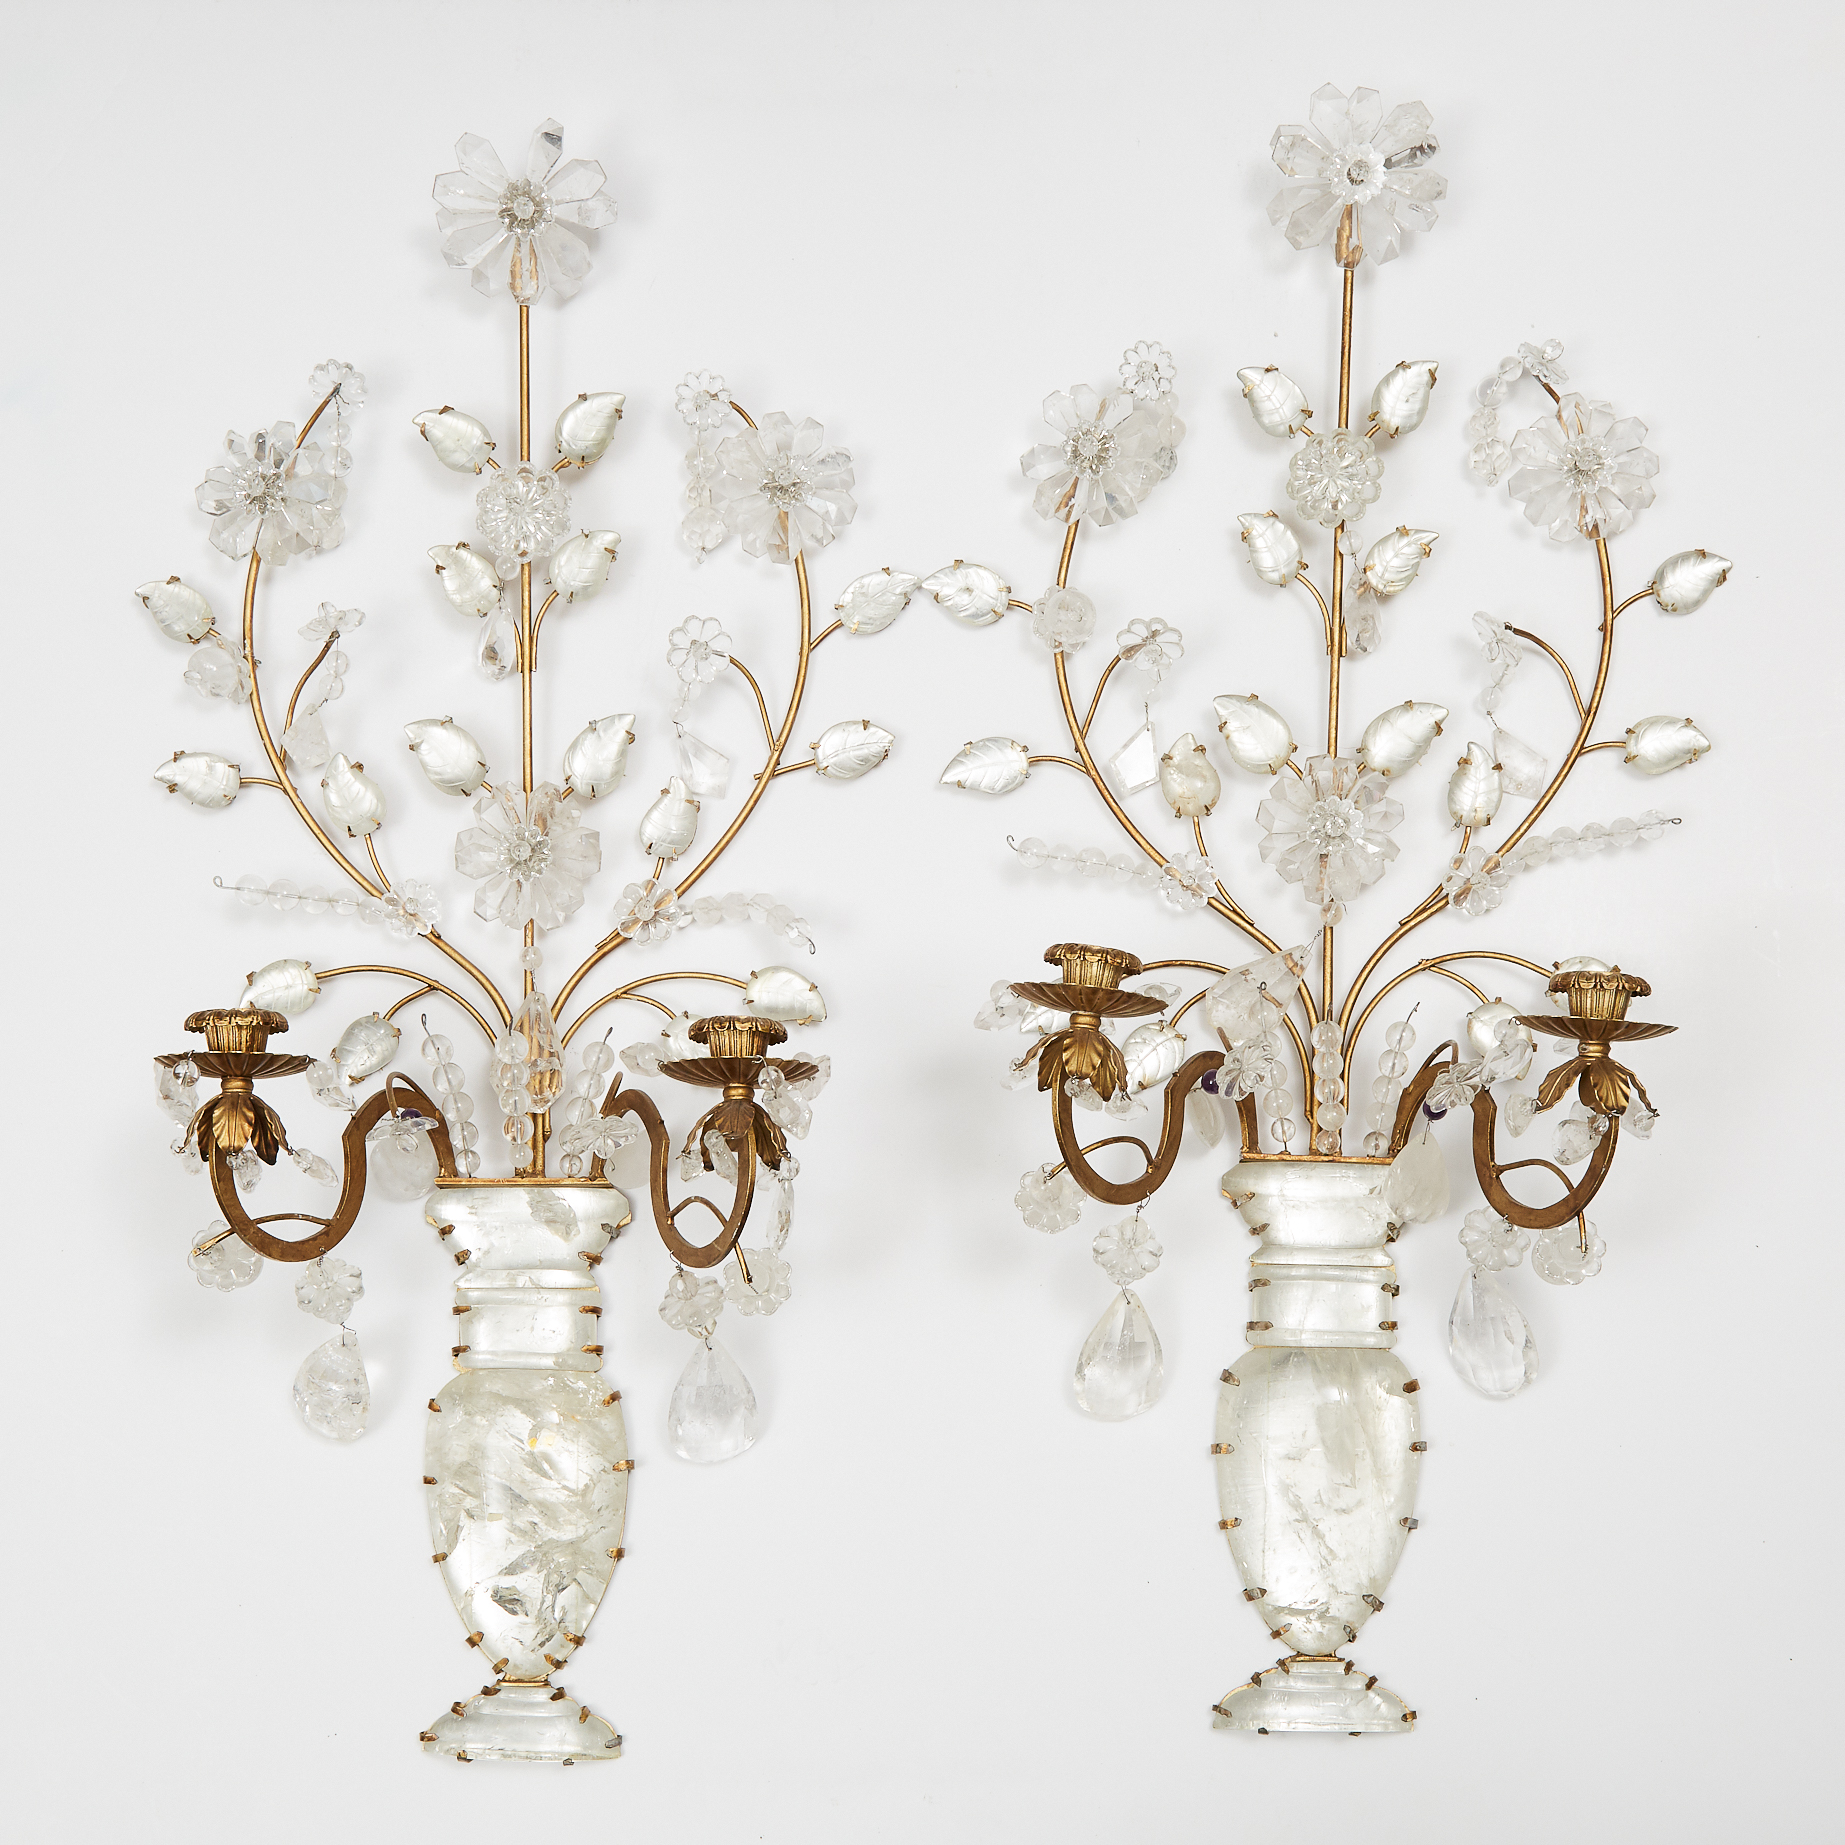 Pair of Large Rock Crystal Mounted Gilt Metal Wall Sconces, mid 20th century